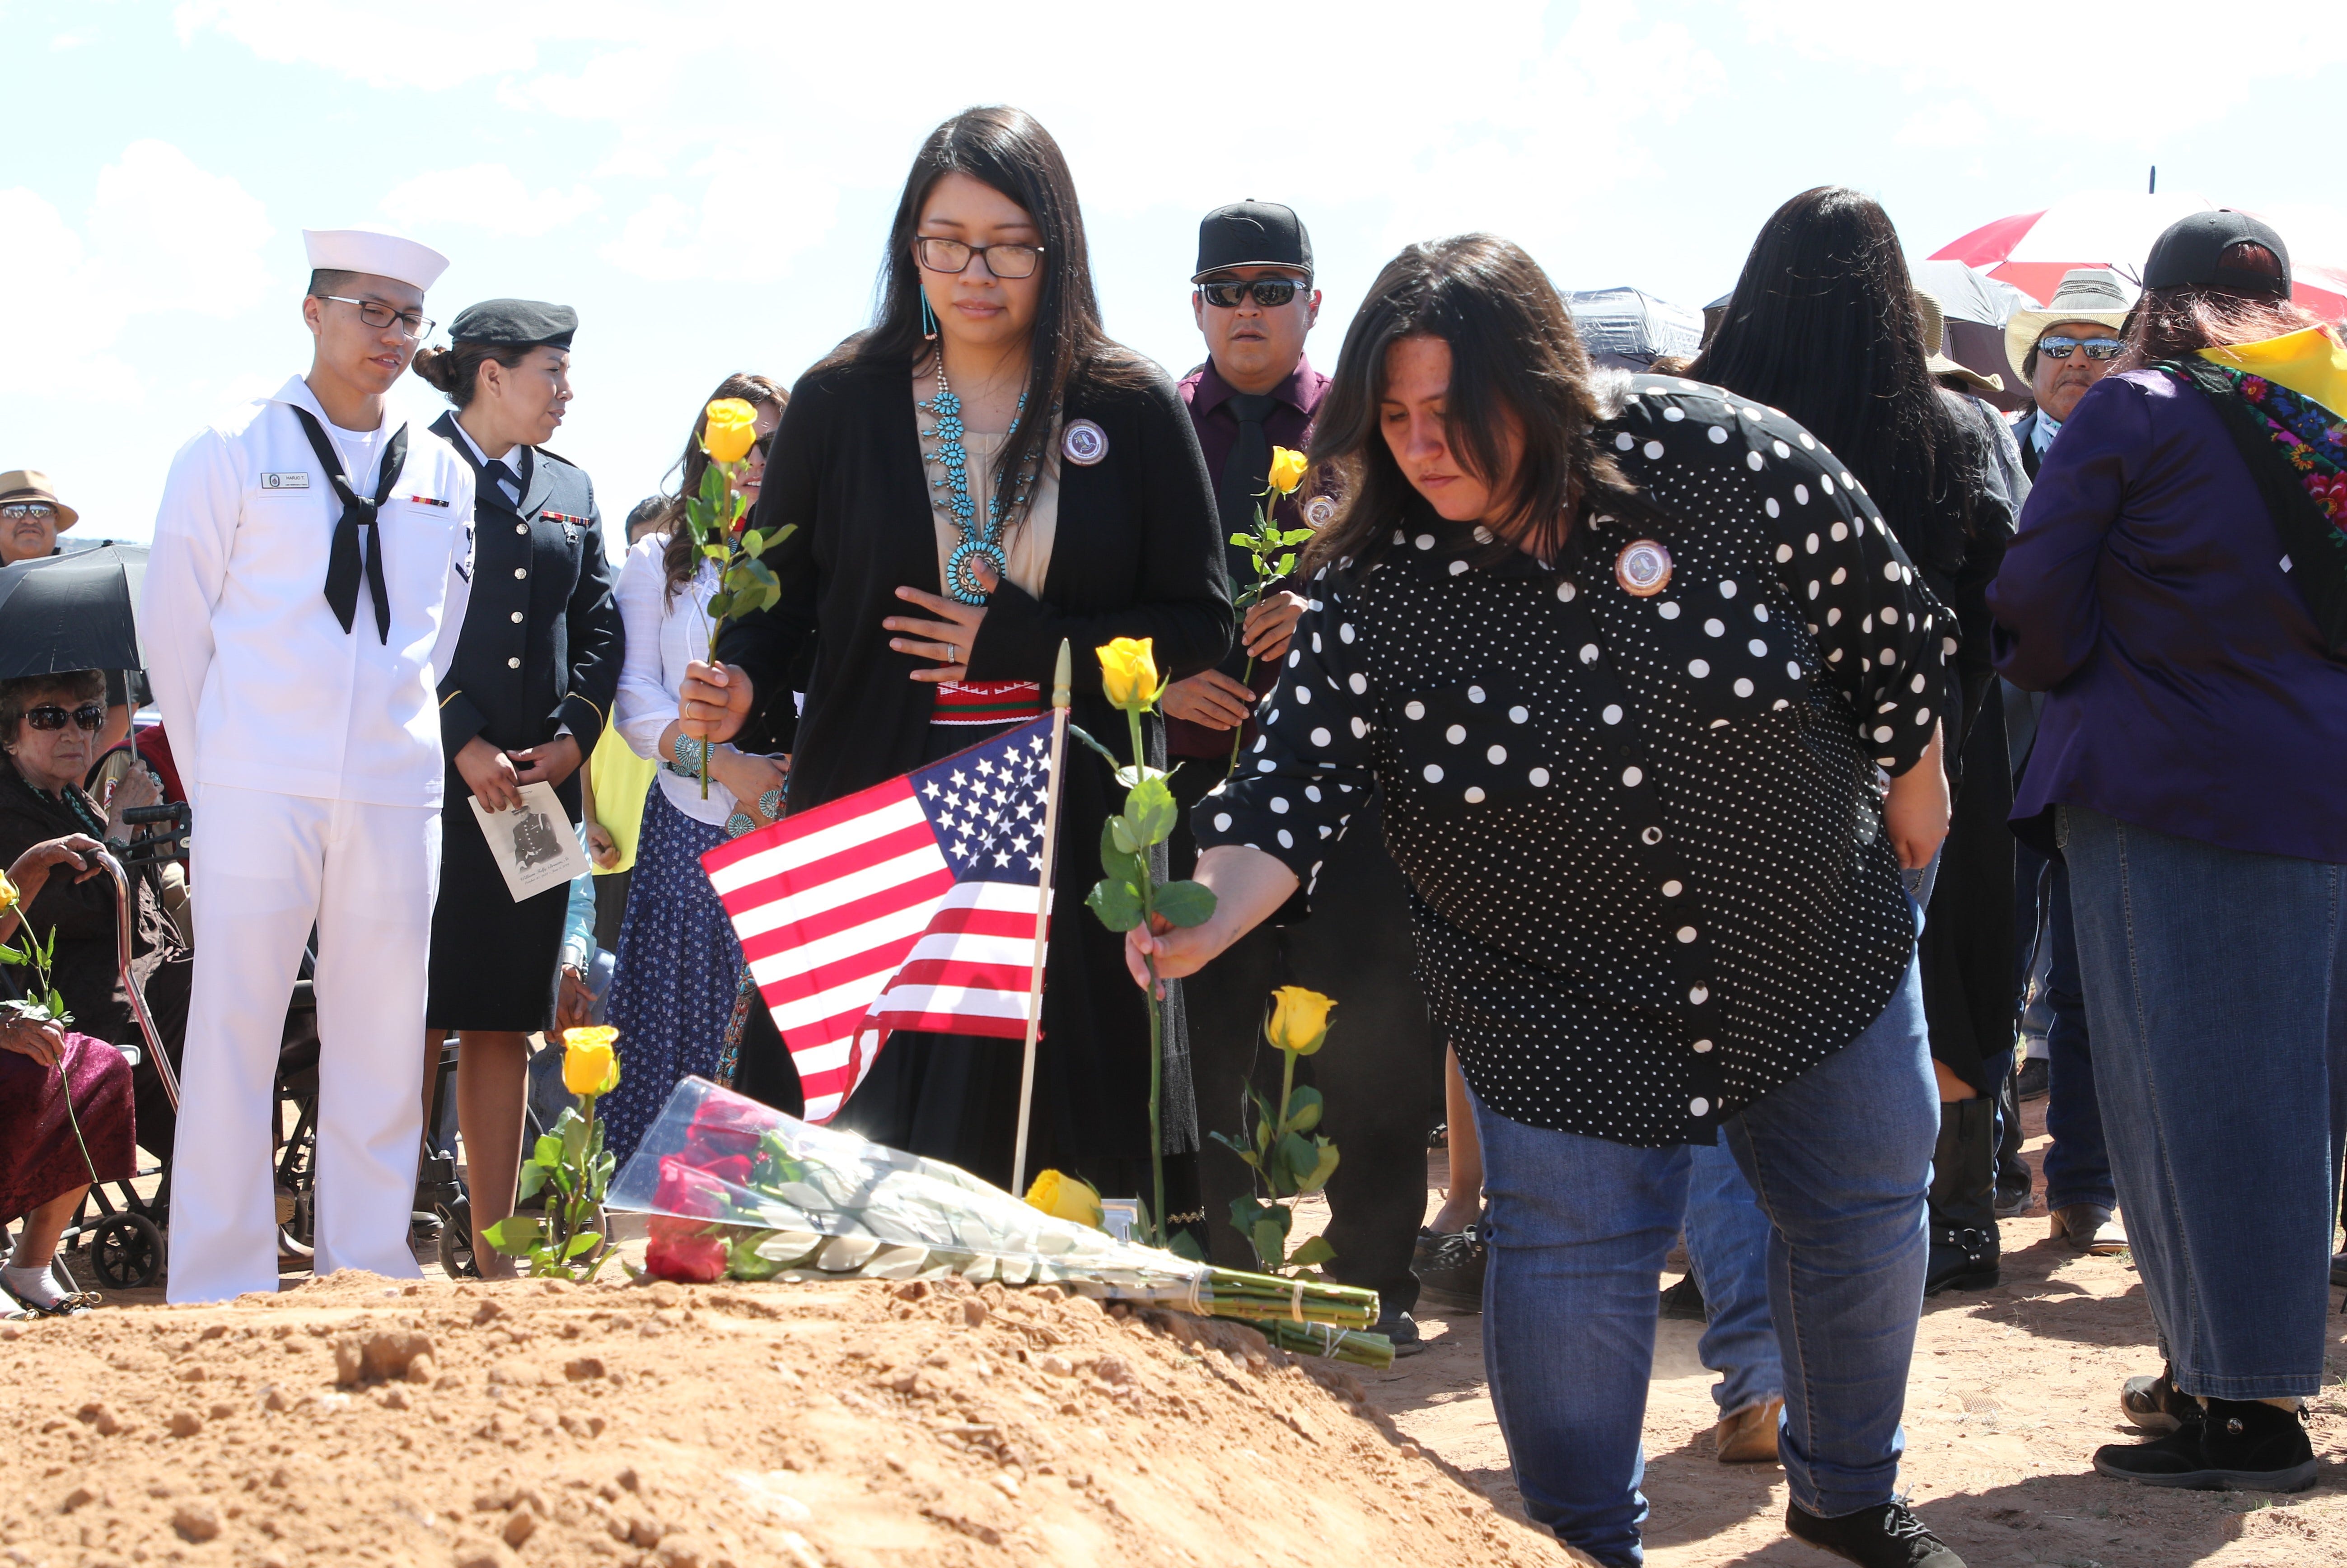 Relatives of Navajo Code Talker William Tully Brown Sr. place flowers his grave at the Fort Defiance Veterans Cemetery on June 6 in Fort Defiance, Ariz.